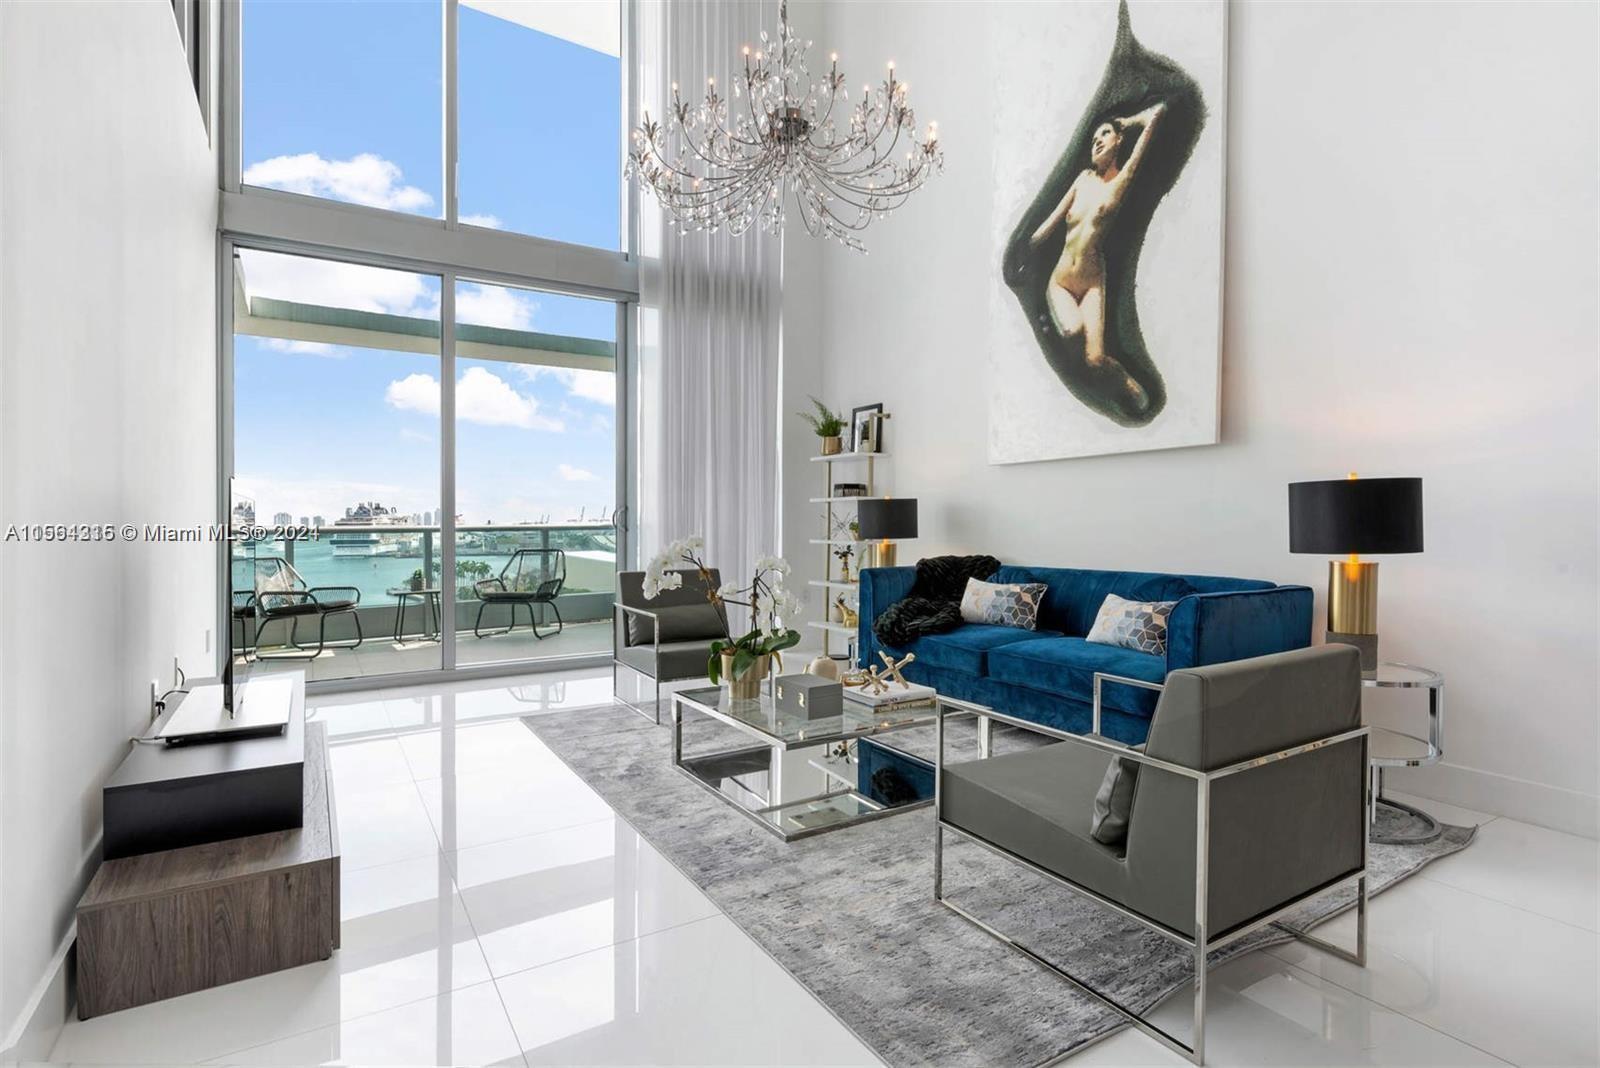 Stunning 2-story bay-front townhome in Downtown Miami luxury building: 900 Biscayne. This exquisitel